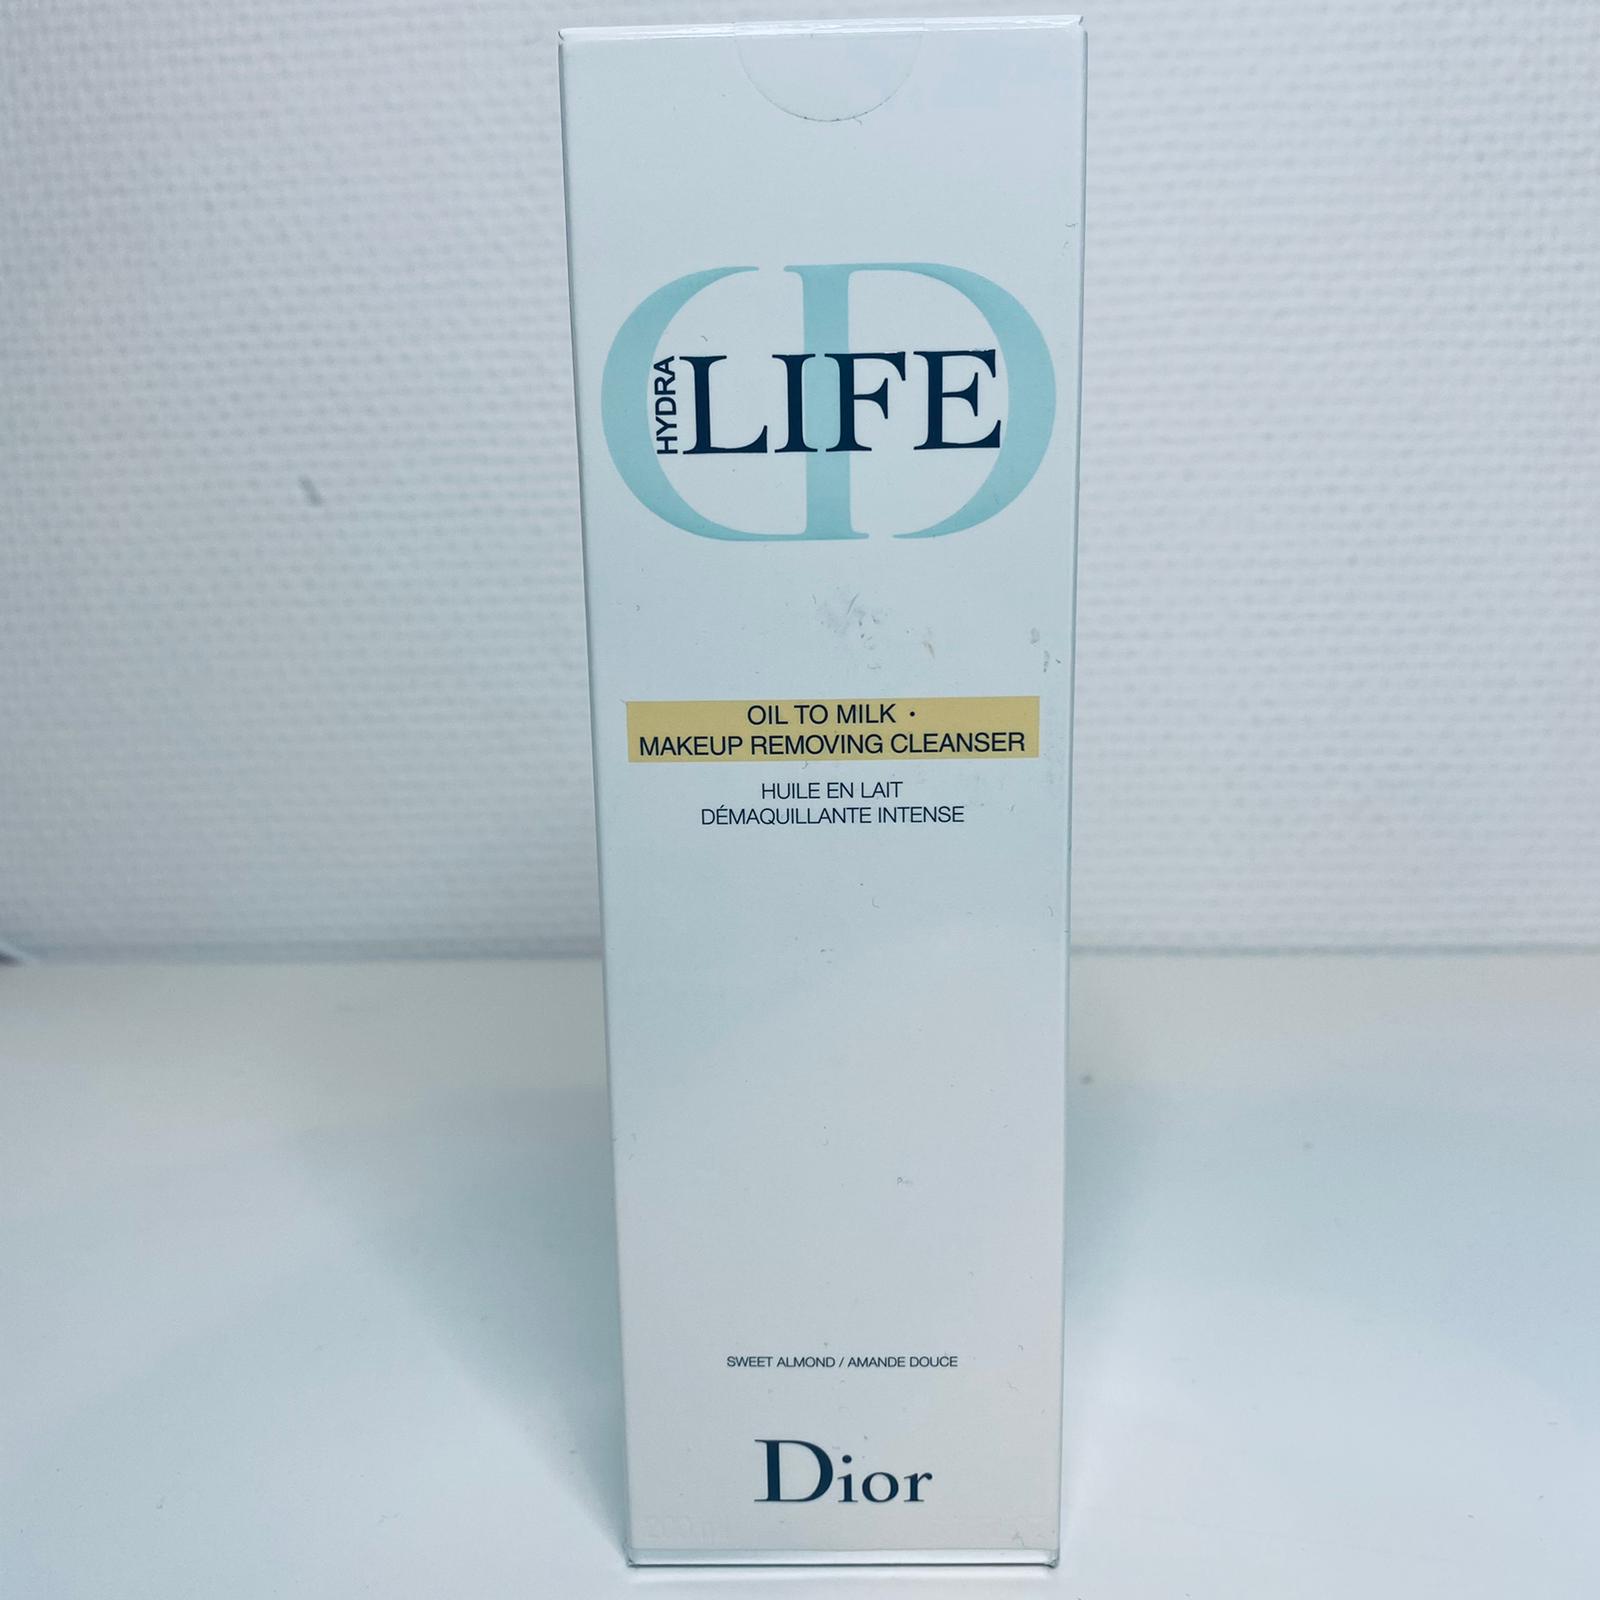 Dior hydra life oil to milk makeup removing cleanser 200 ml